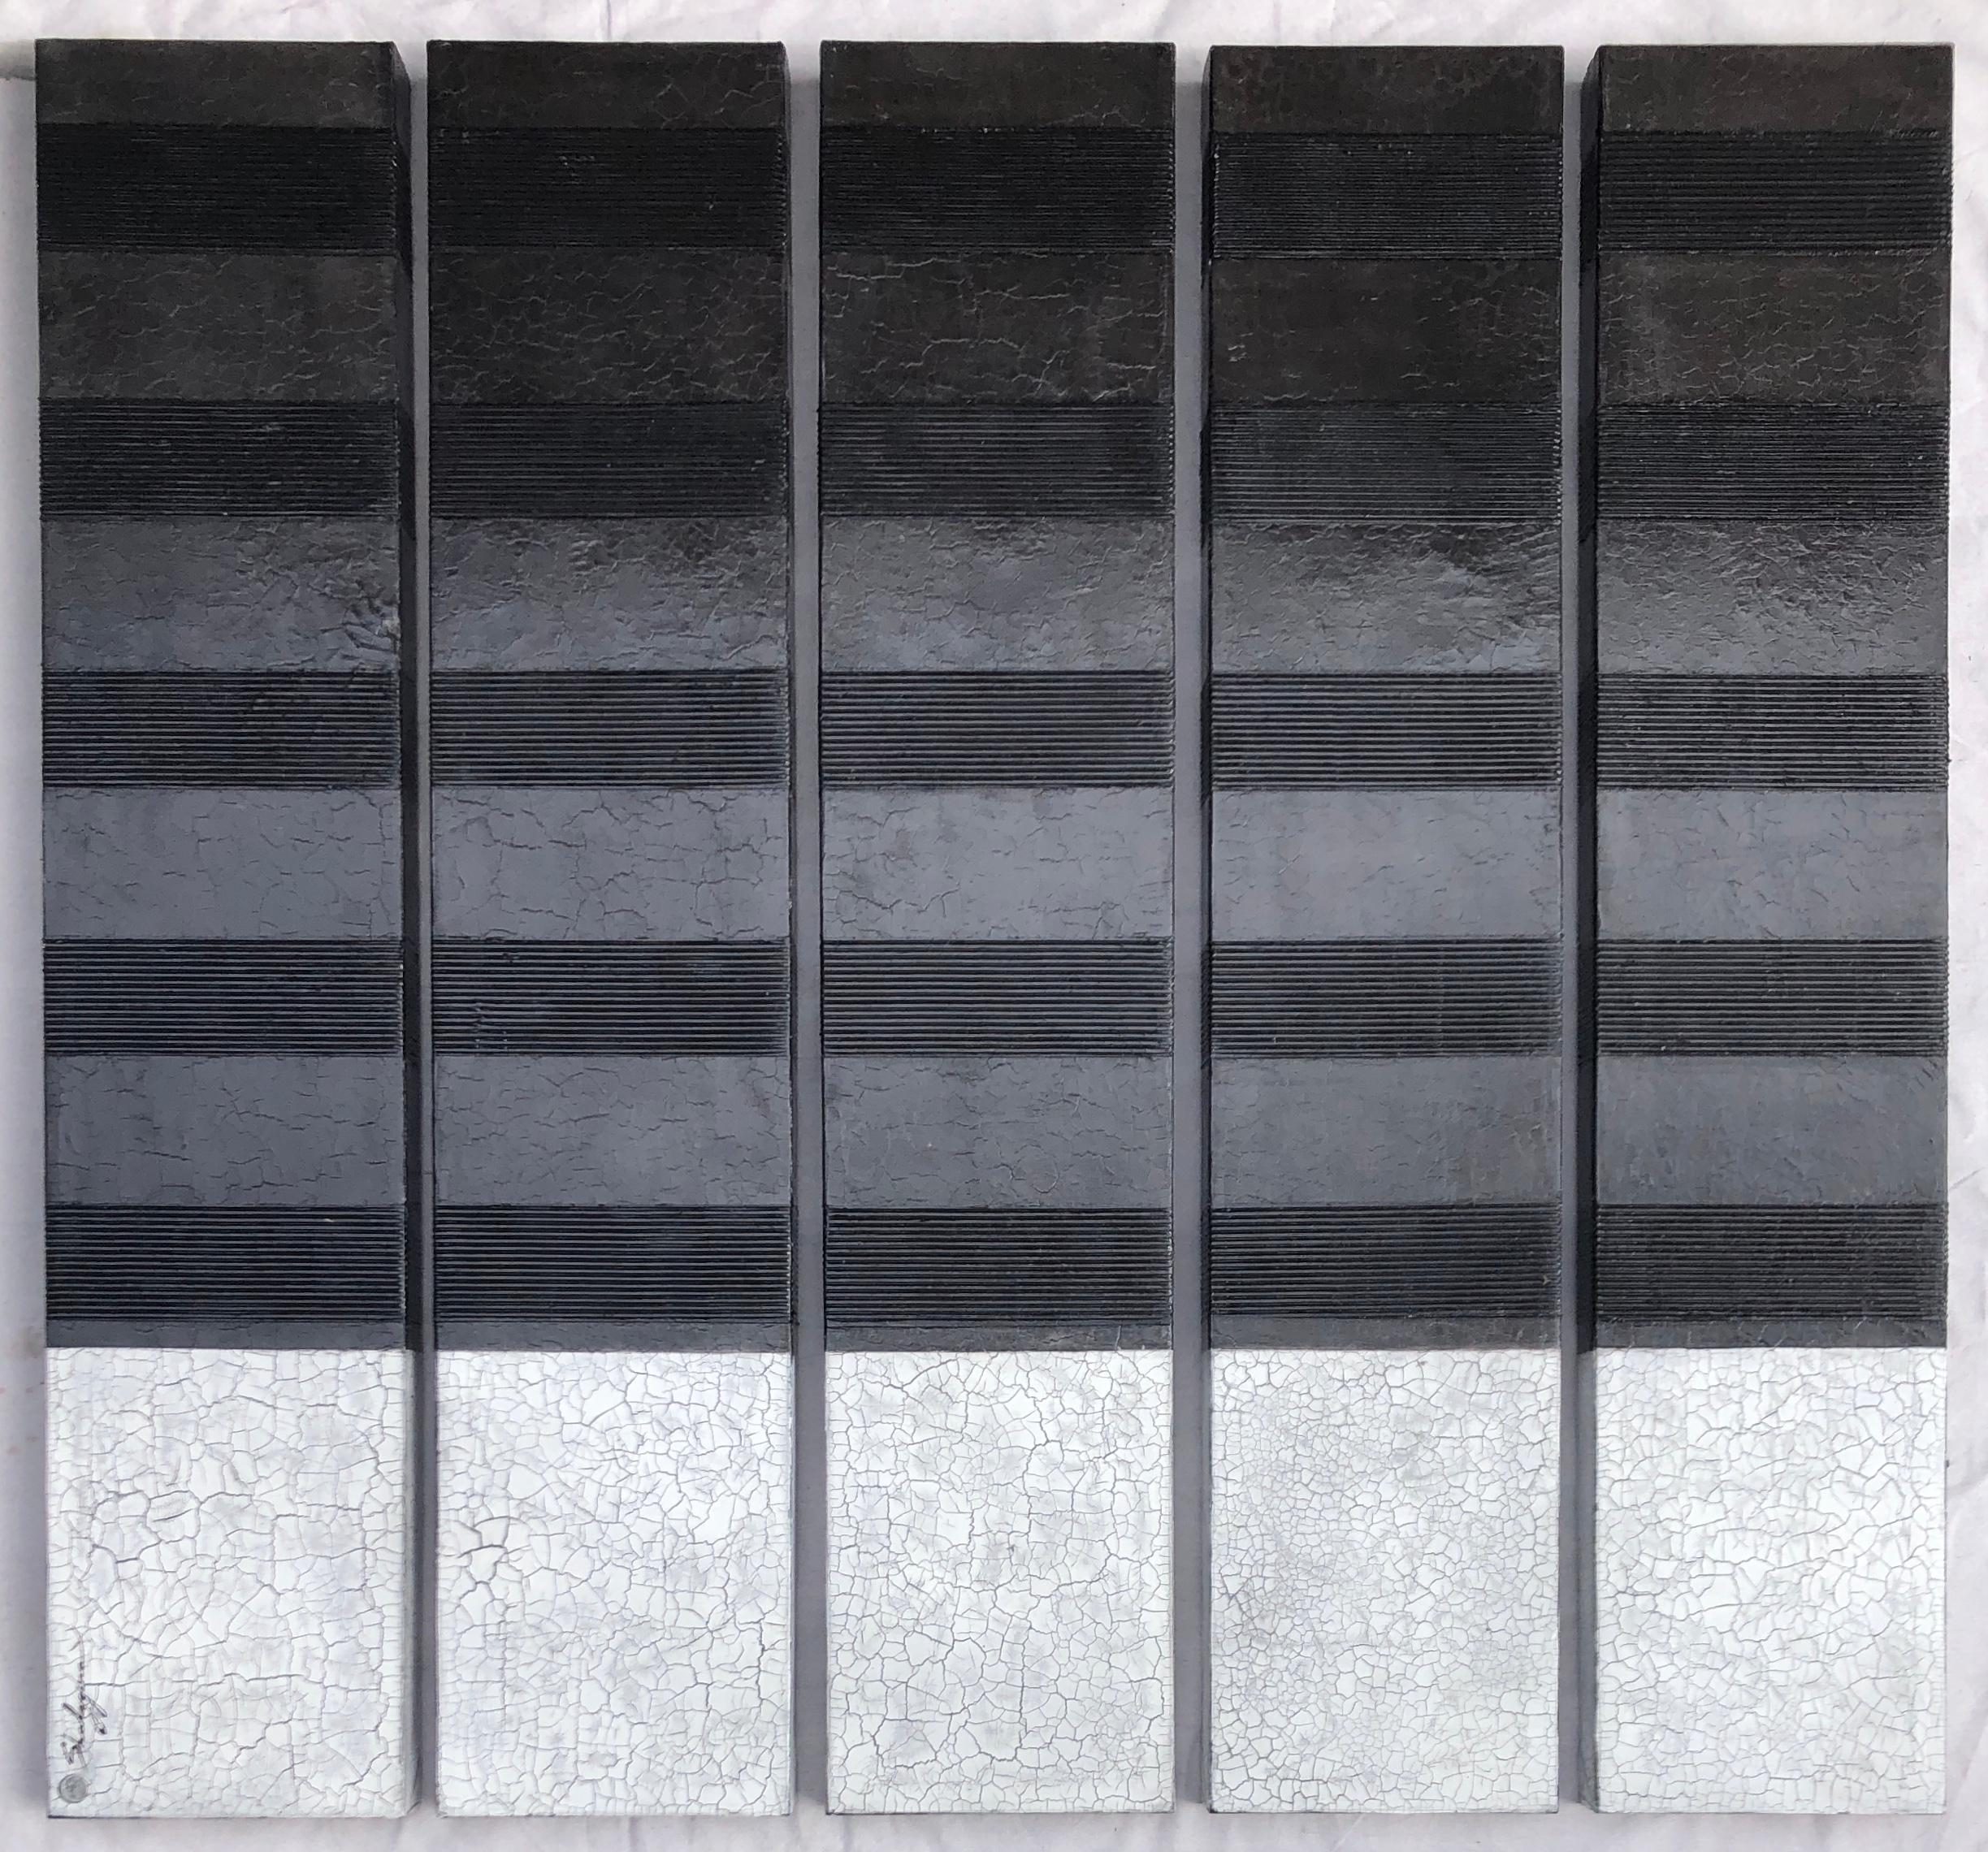 "The Theory of Light Frequencies" series #5 is a one-of-a-kind contemporary black (charcoal) & white (light grey) abstract painting by Svetlana Shalygina, with black raised linear design breaking up the two sections. This textural set is comprised